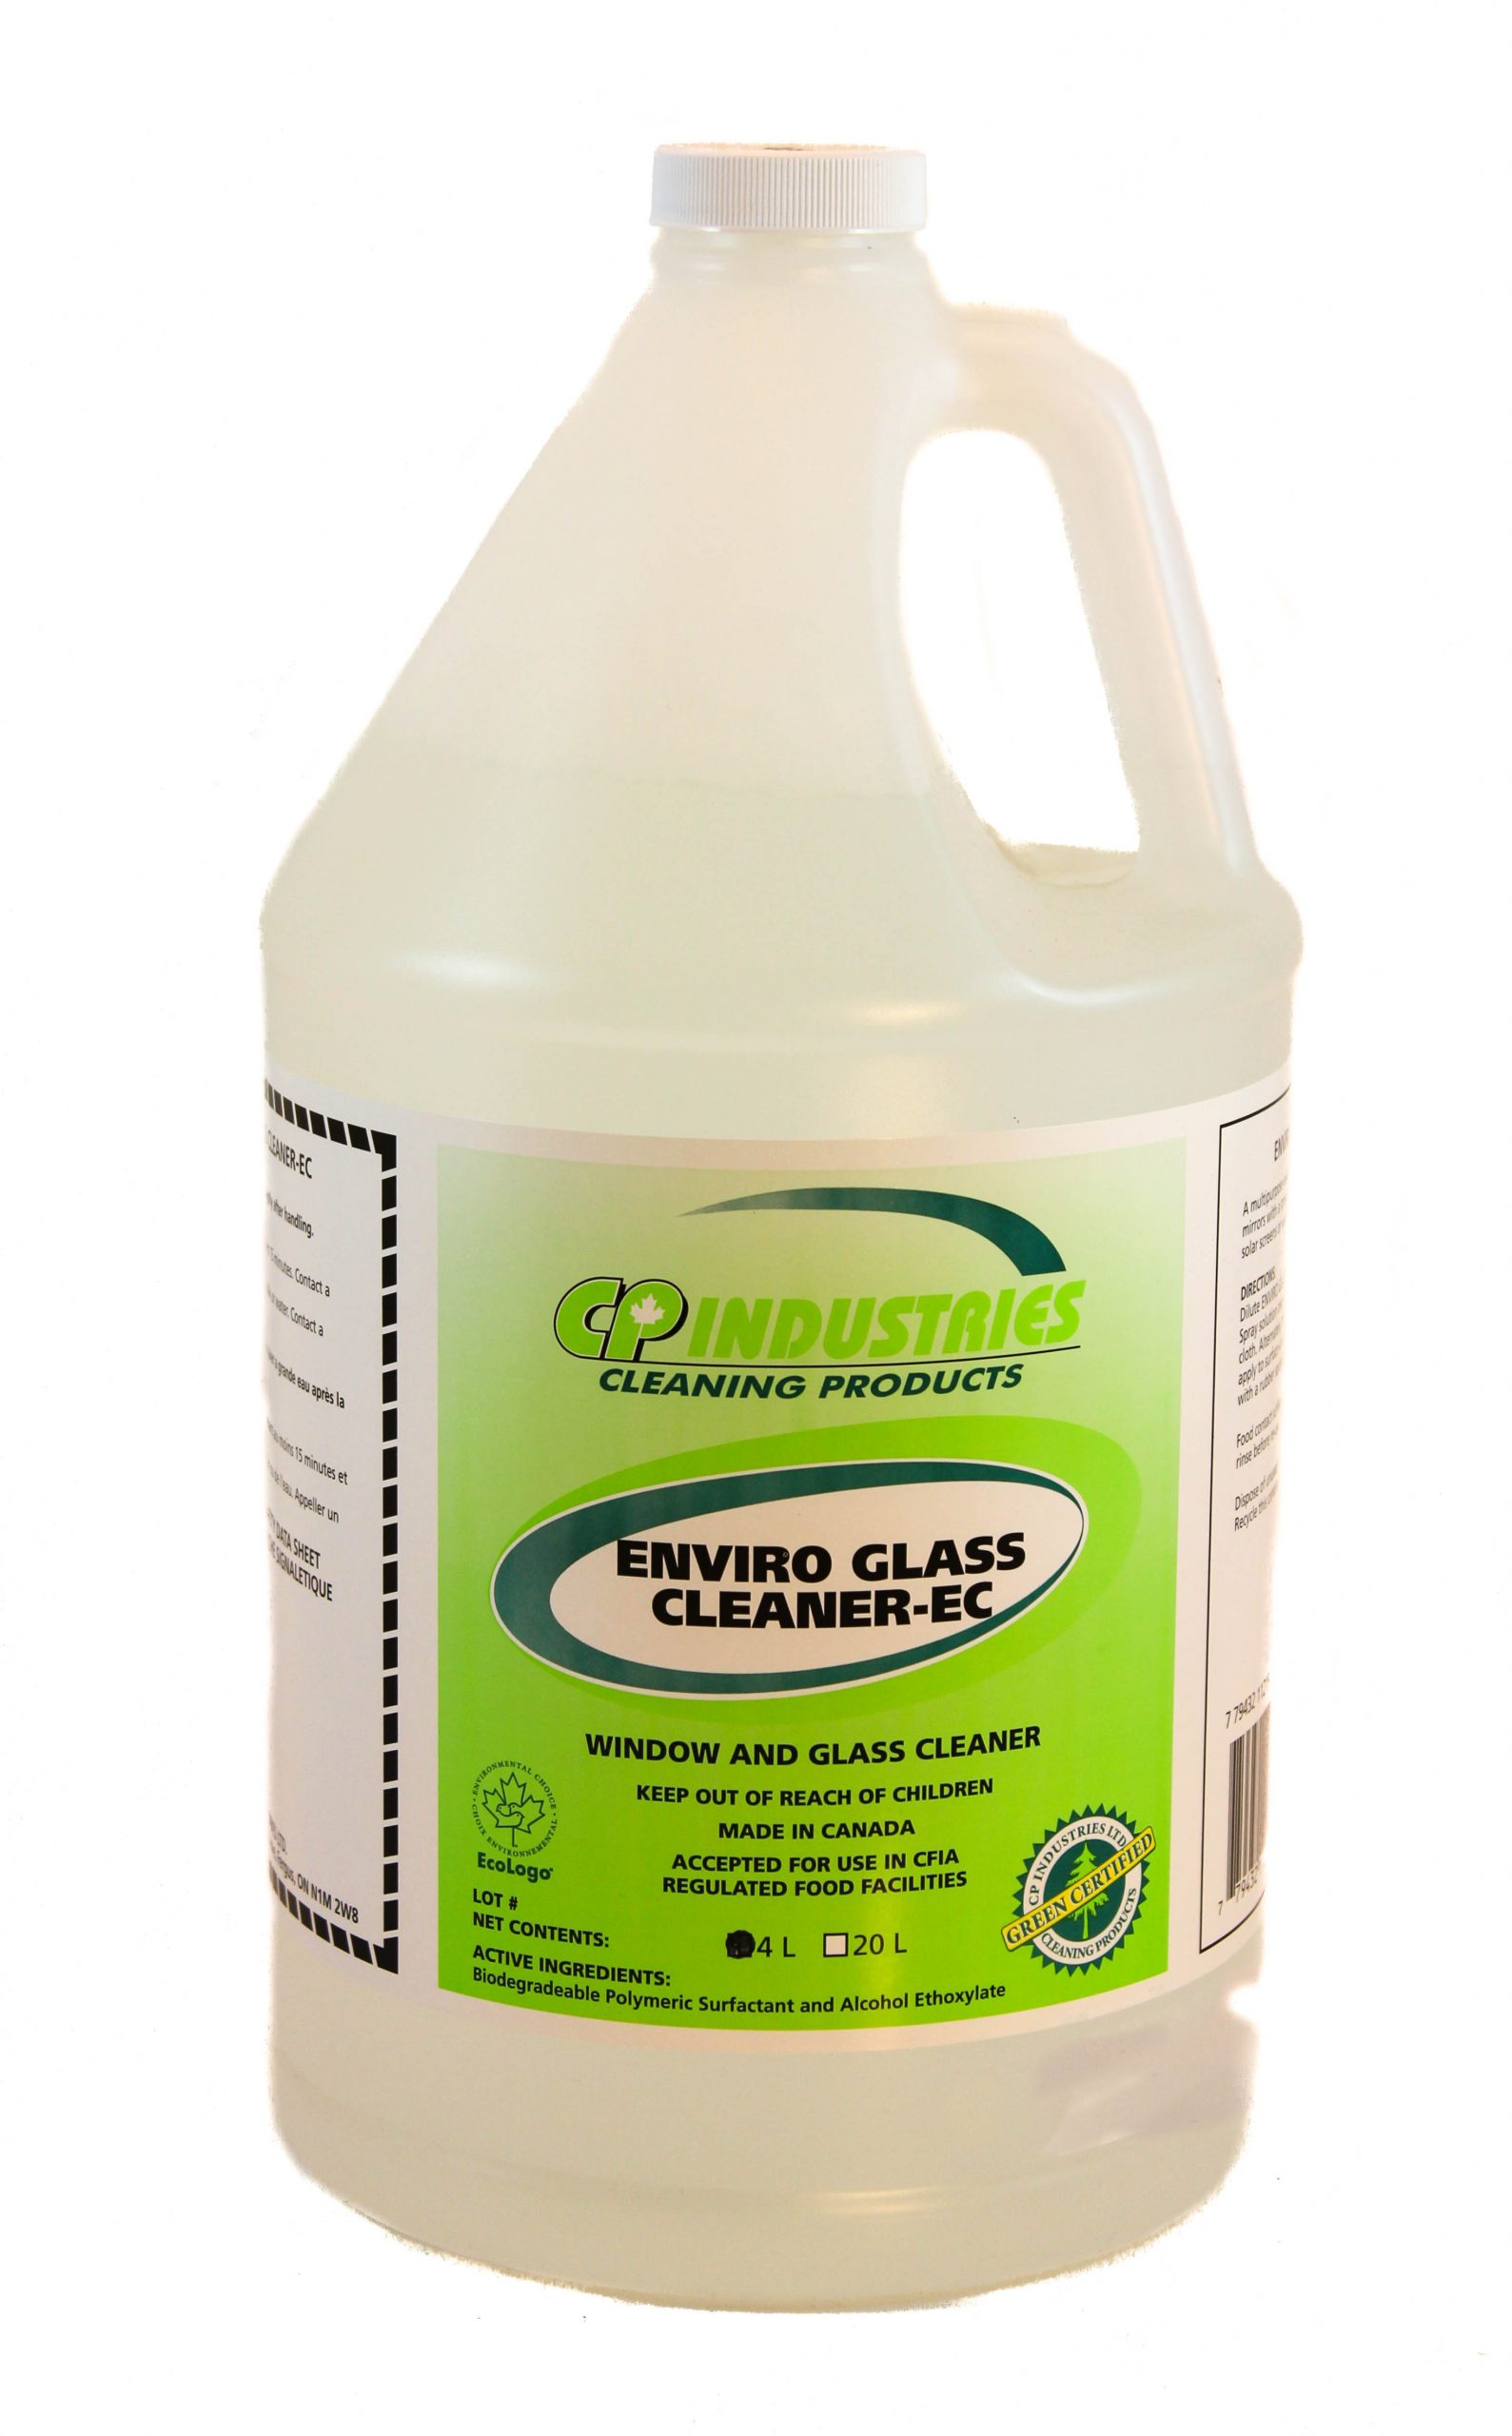 CP Industries: Enviro Glass Cleaner-EC, window and glass cleaner